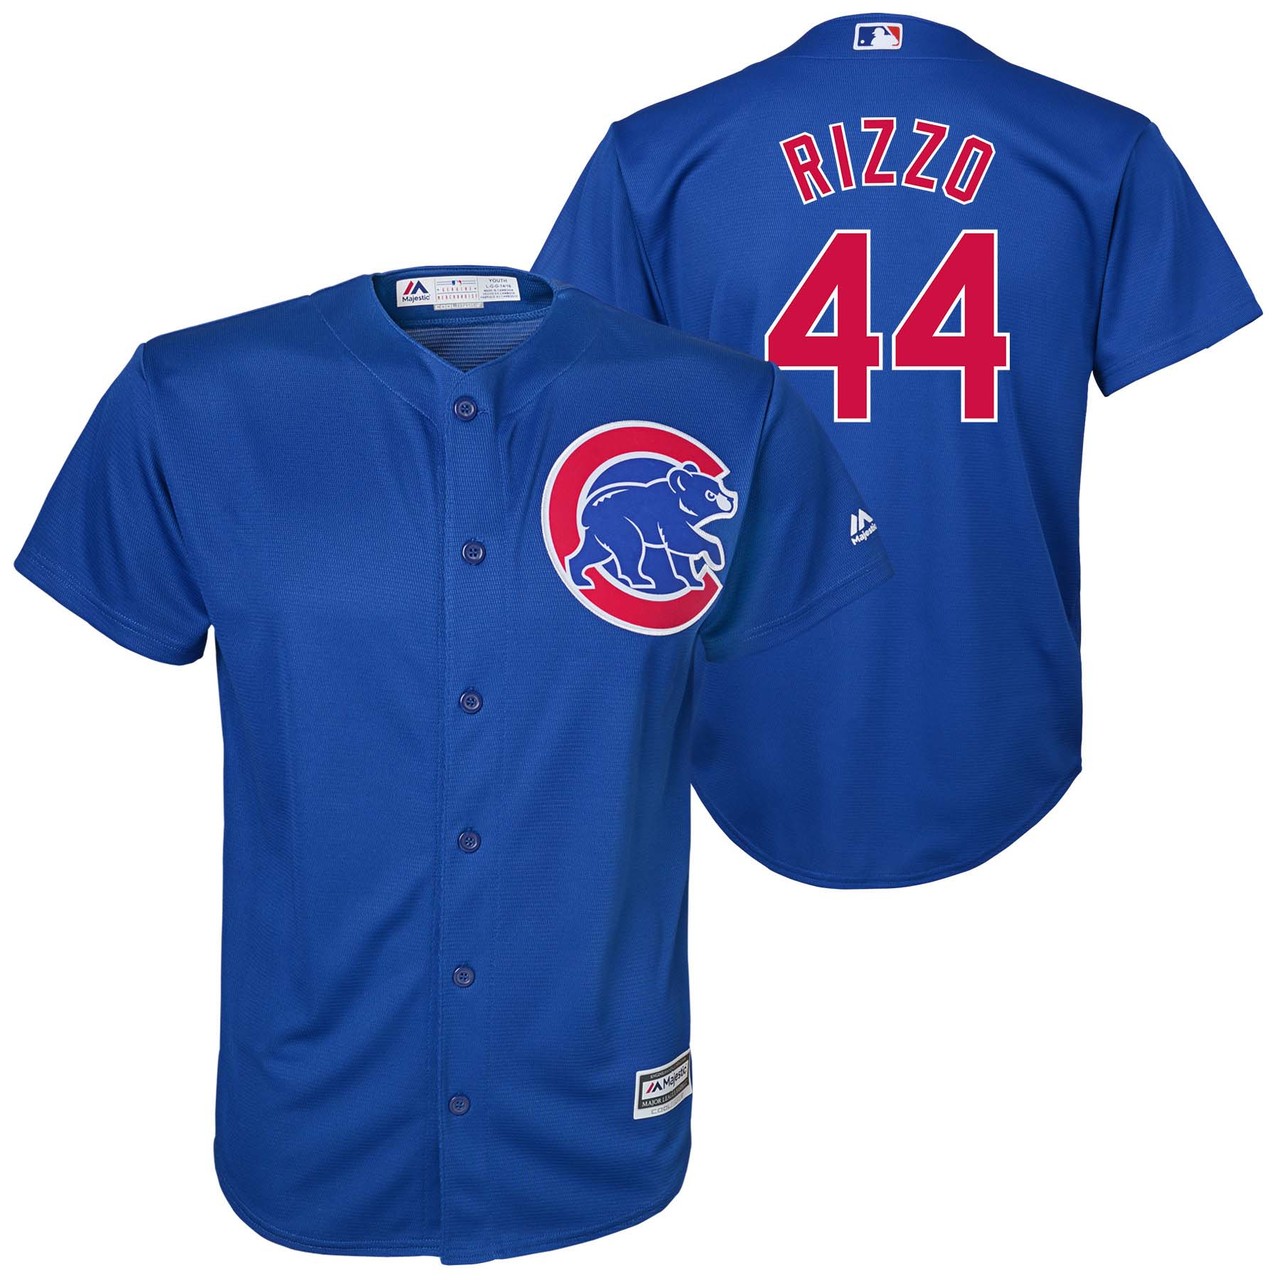 rizzo youth jersey